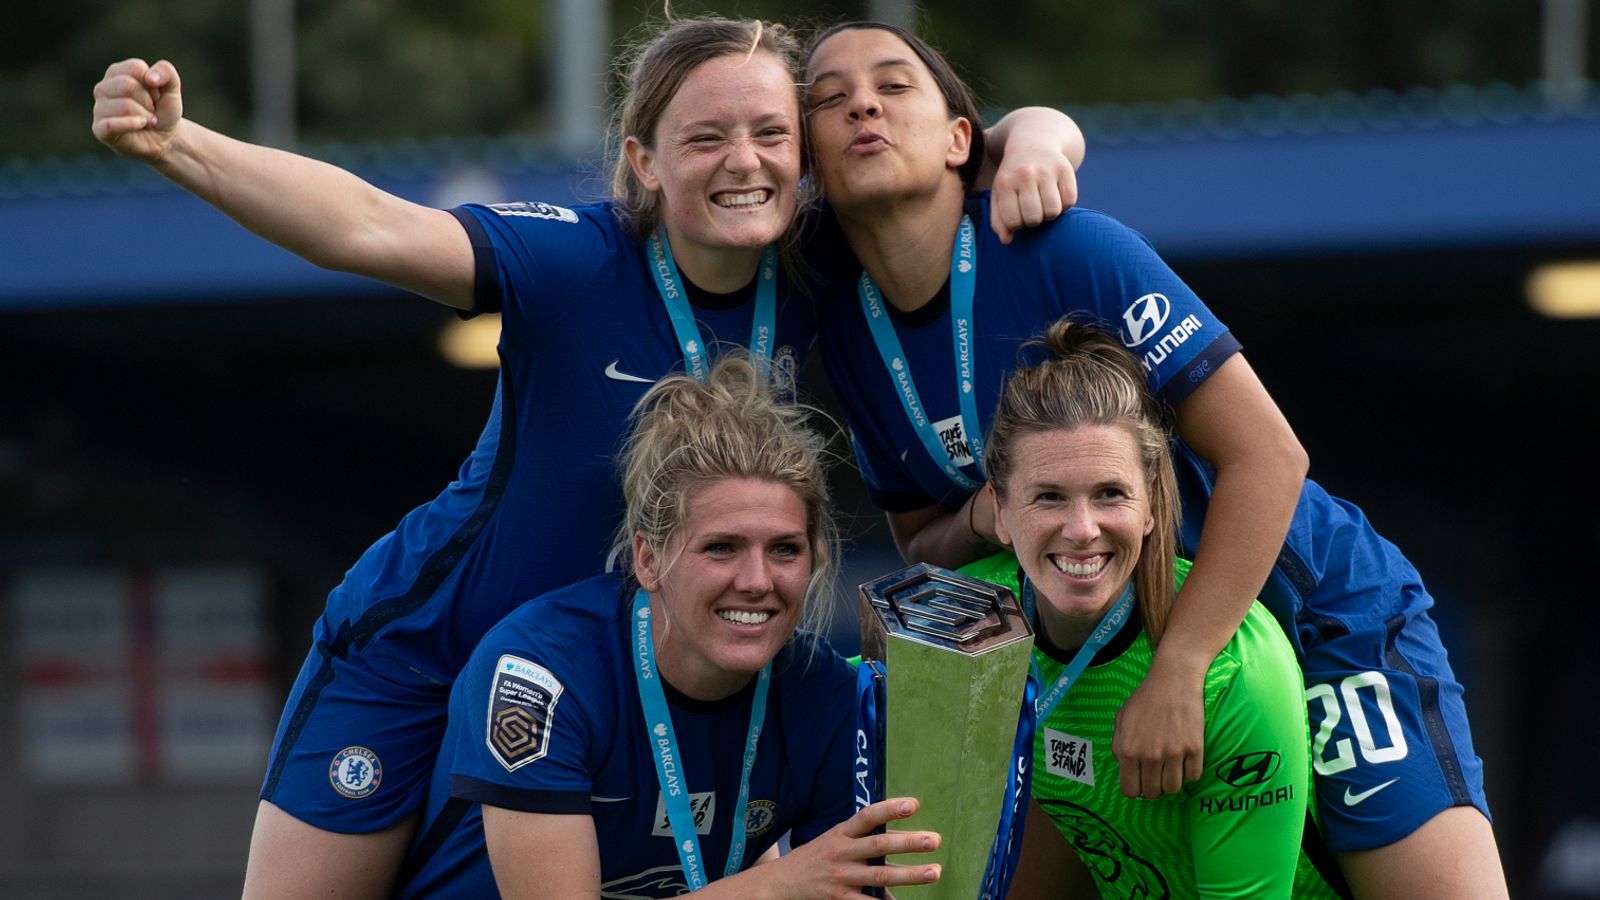 WSL main driving force behind rise in viewing figures for women's sport